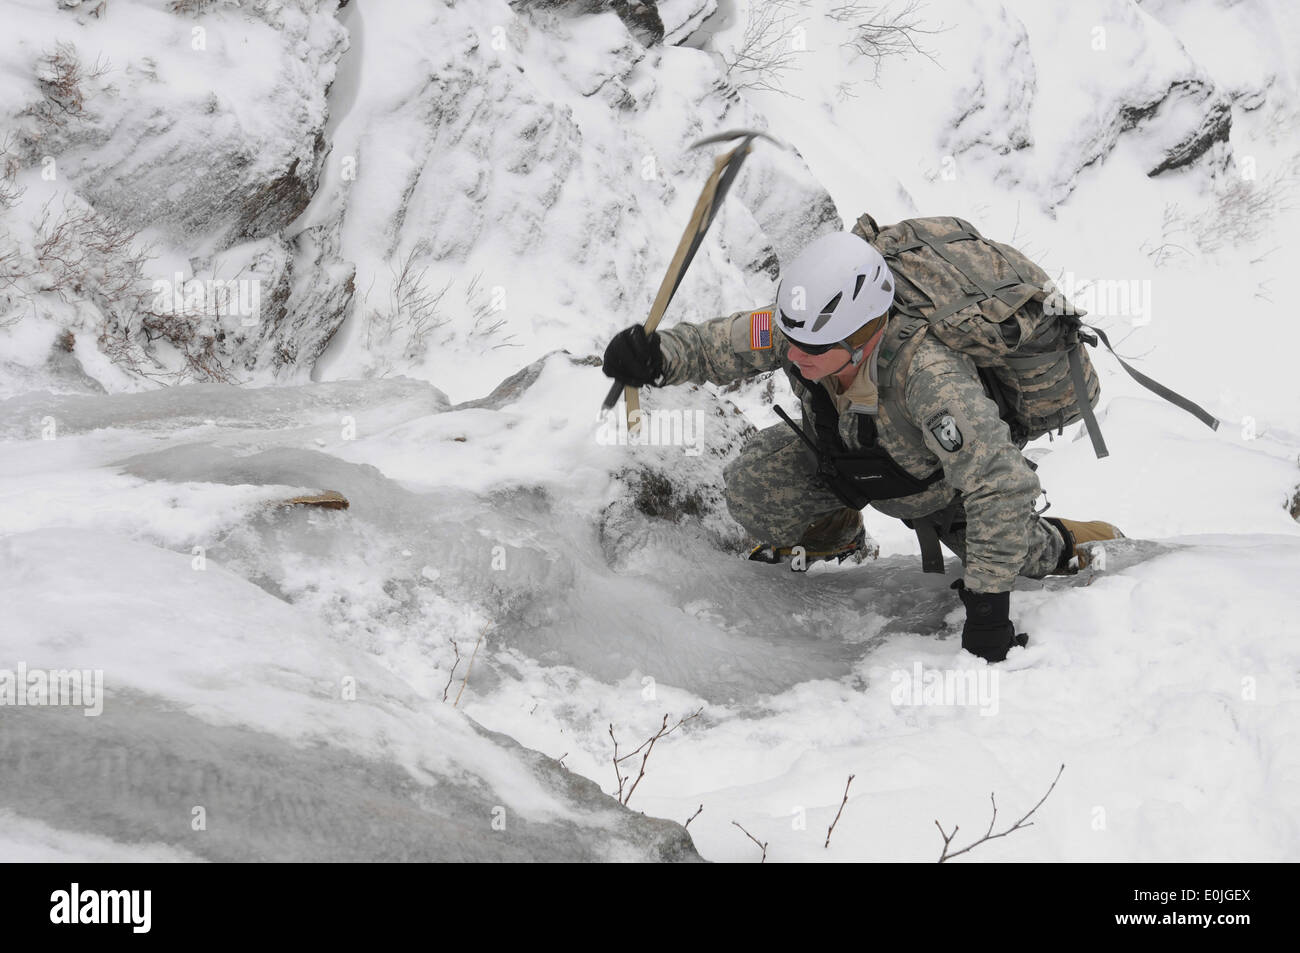 An Army Mountain Warfare Instructor leads the way at Smuggler's Notch, Vt., ascending through a ravine over an ice field on Fe Stock Photo